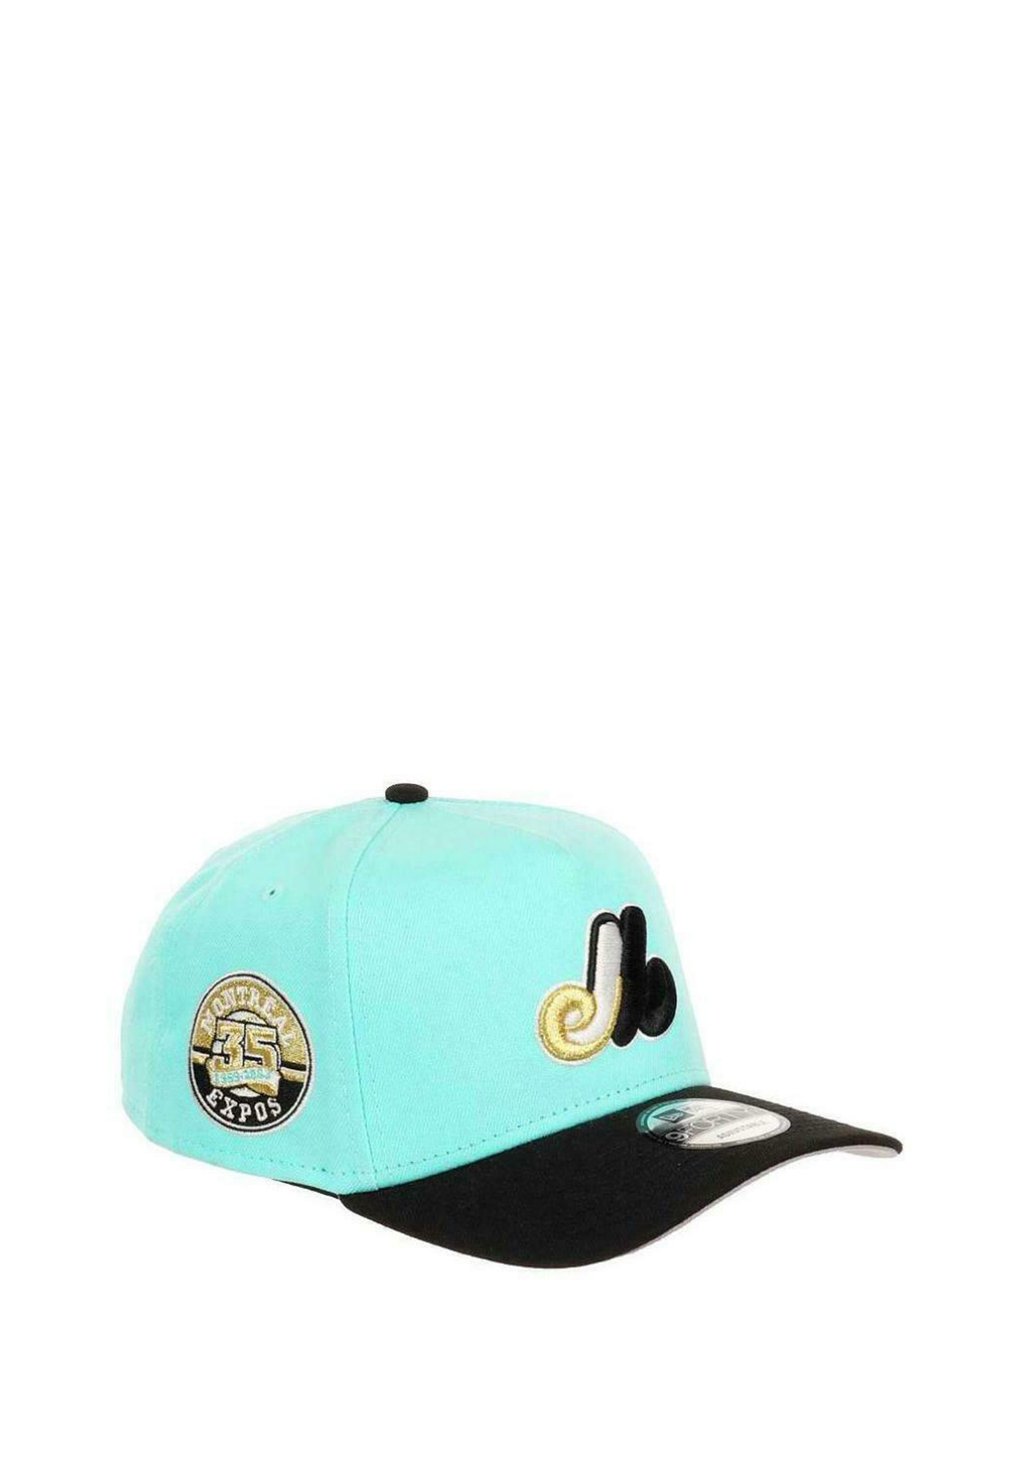 Бейсболка MONTREAL EXPOS MLB 35TH ANNIVERSARY SIDEPATCH COOPERSTOWN 9FORTY A-FRAME SNAPBACK New Era, цвет turquoise